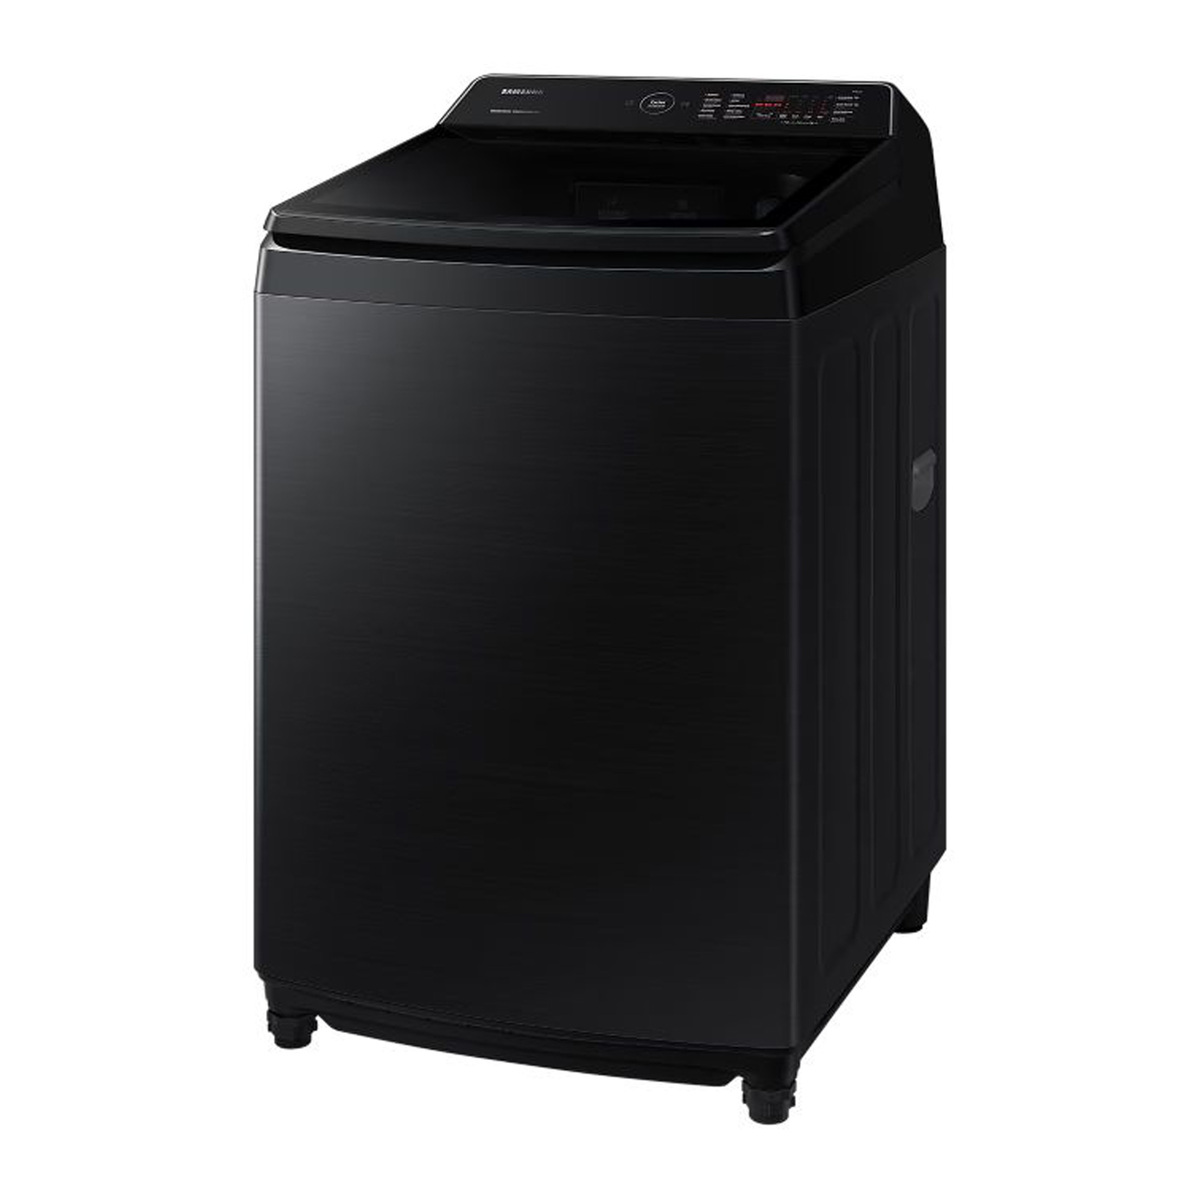 Samsung Top load Washer with Ecobubble and Digital Inverter Technology, 16 kg, 700 RPM, Black, WA16CG6745BV/SG